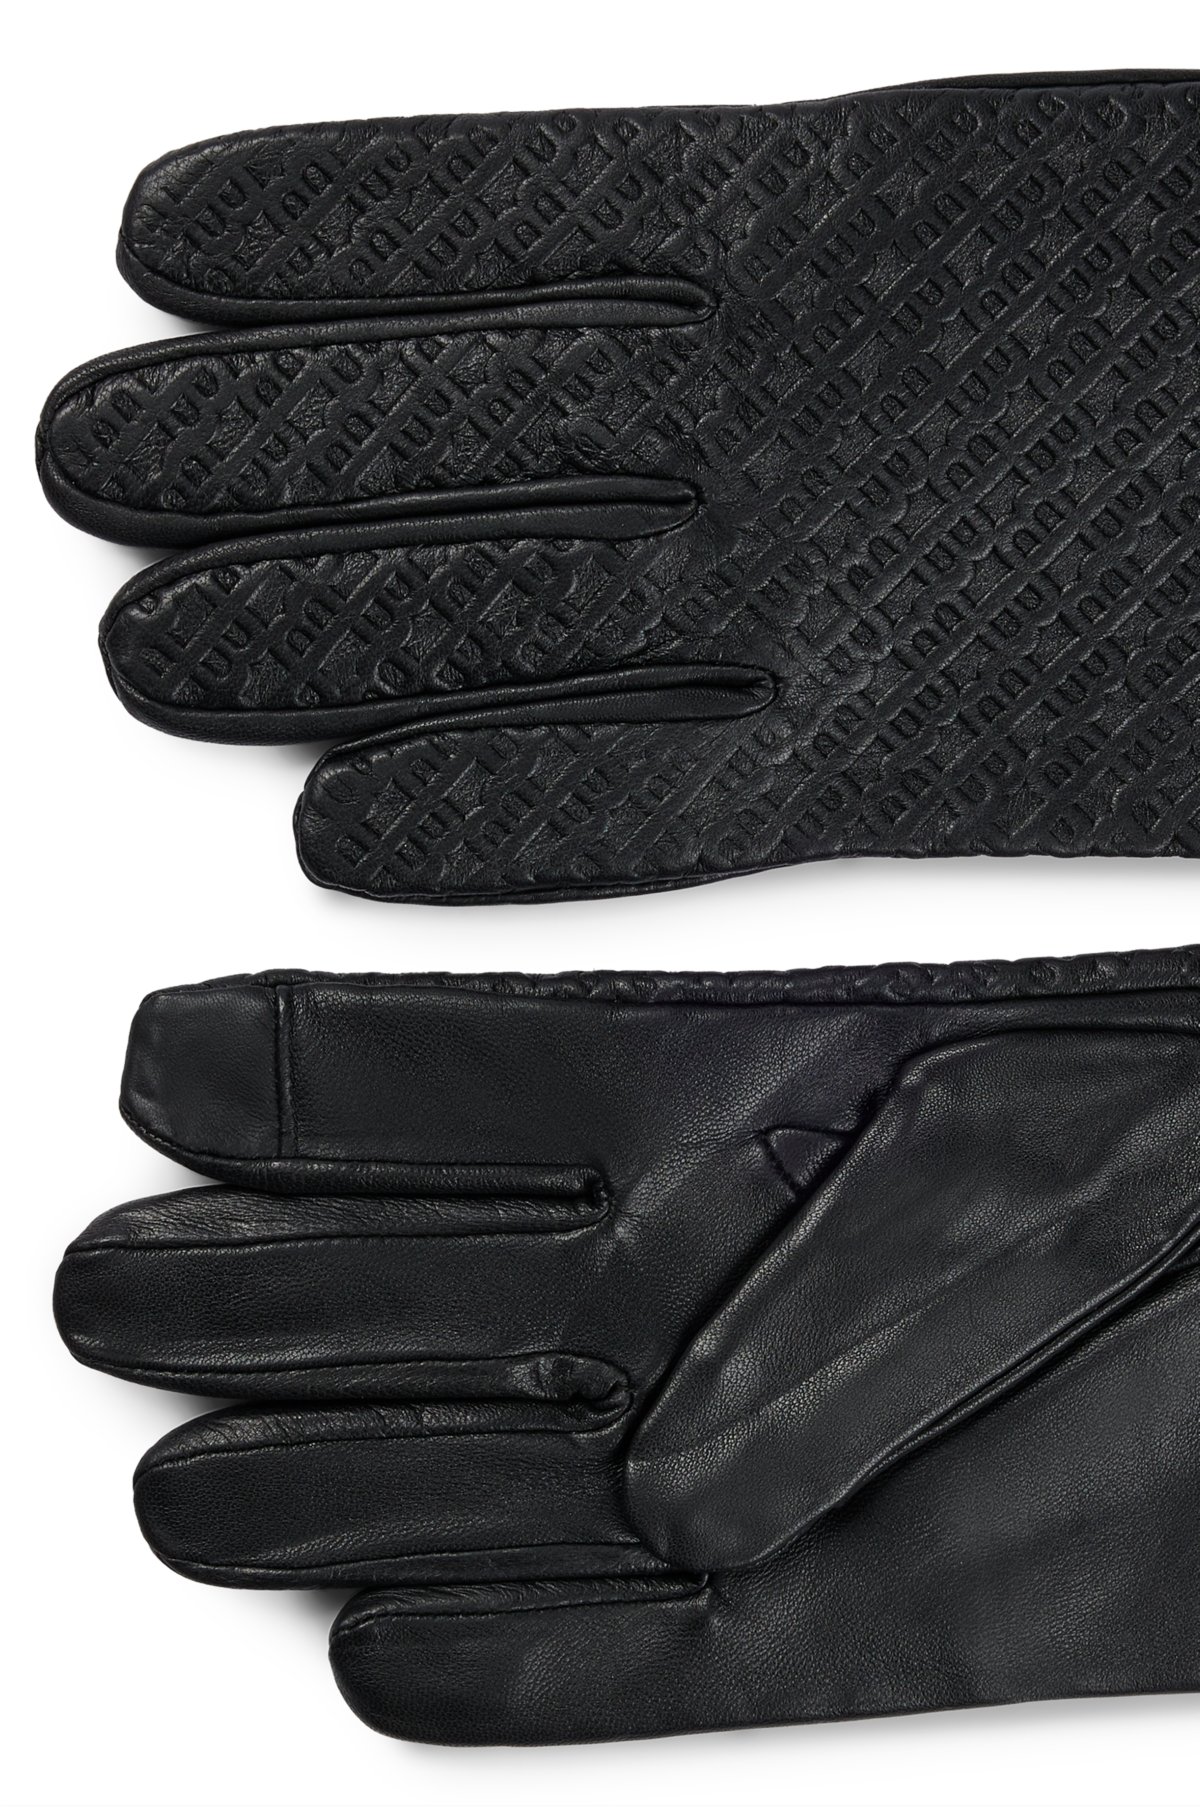 BOSS - Monogrammed gloves in leather with touchscreen-friendly fingertips | Handschuhe